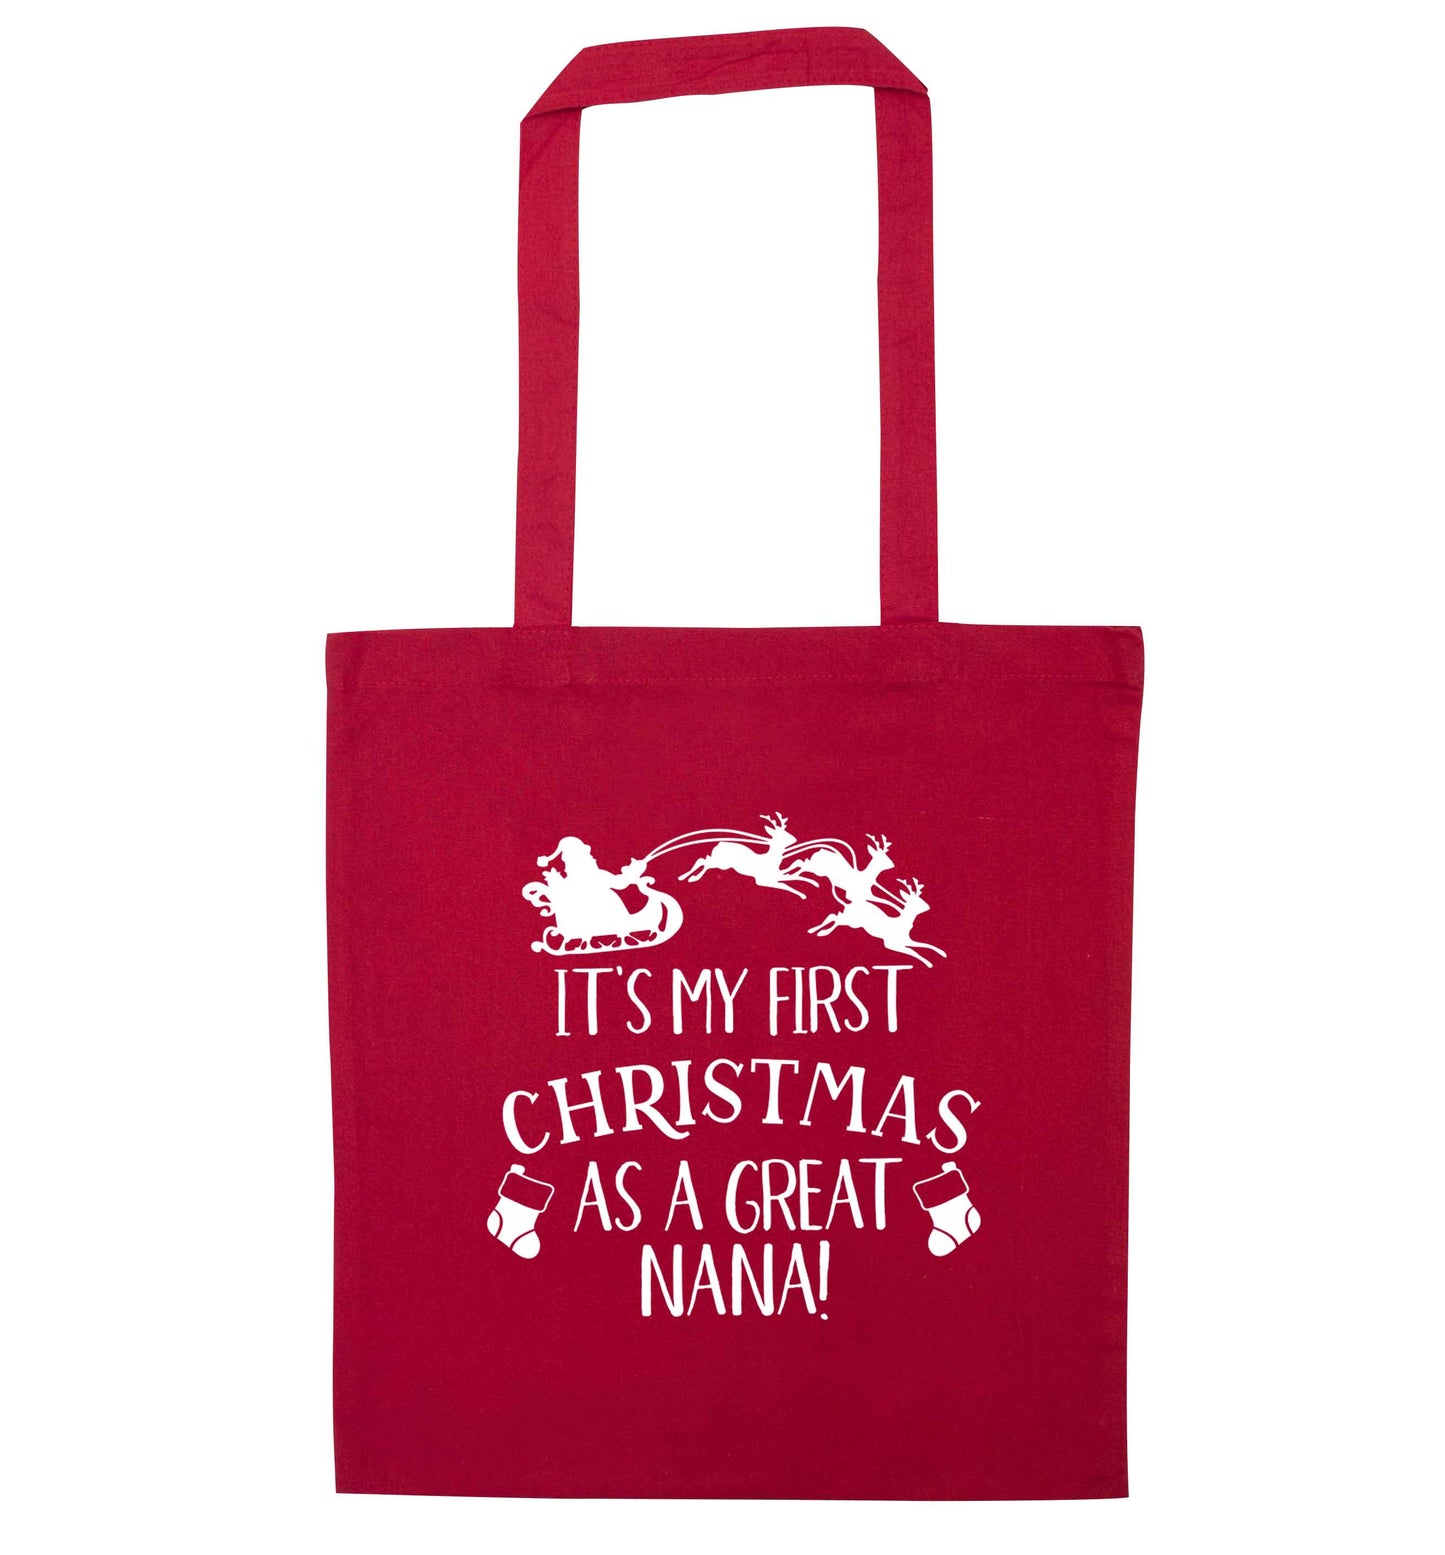 It's my first Christmas as a great nana! red tote bag